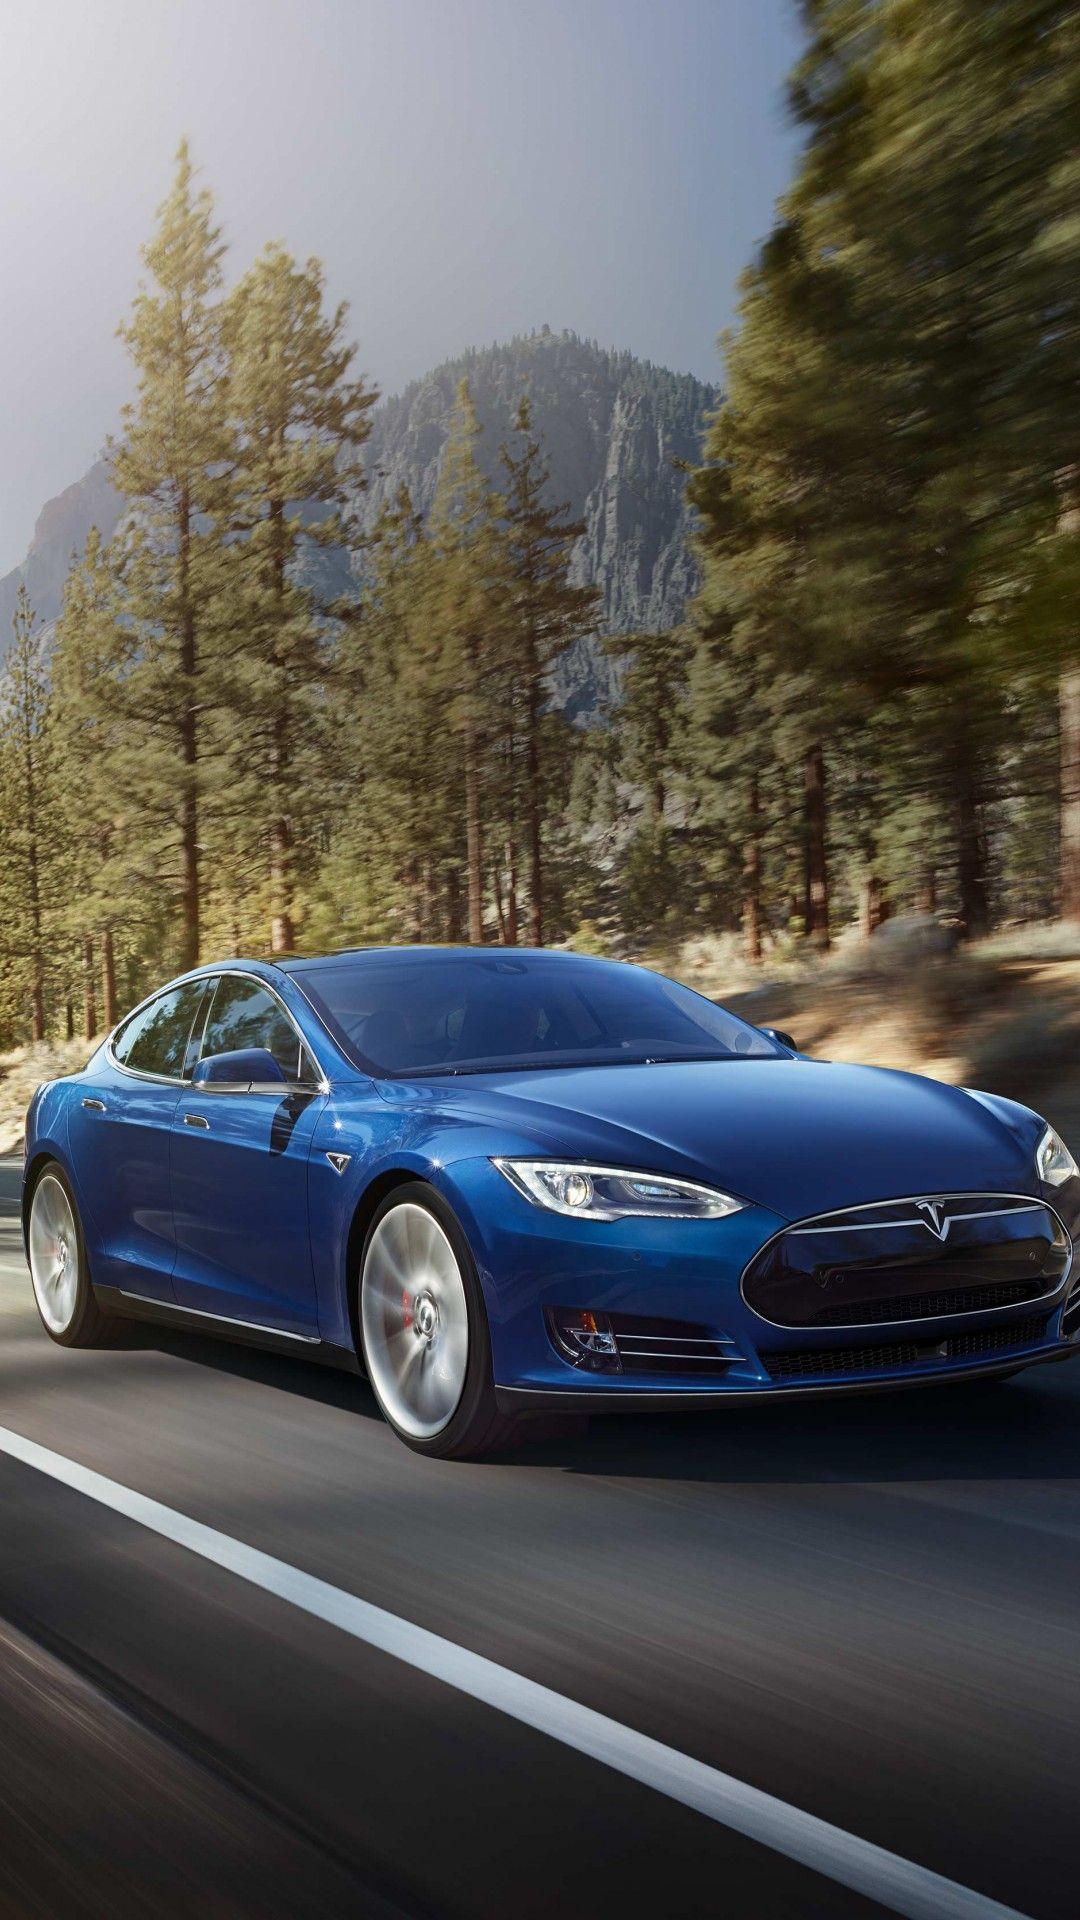 Tesla Model S wallpaper for iPhone. Cars. Cars